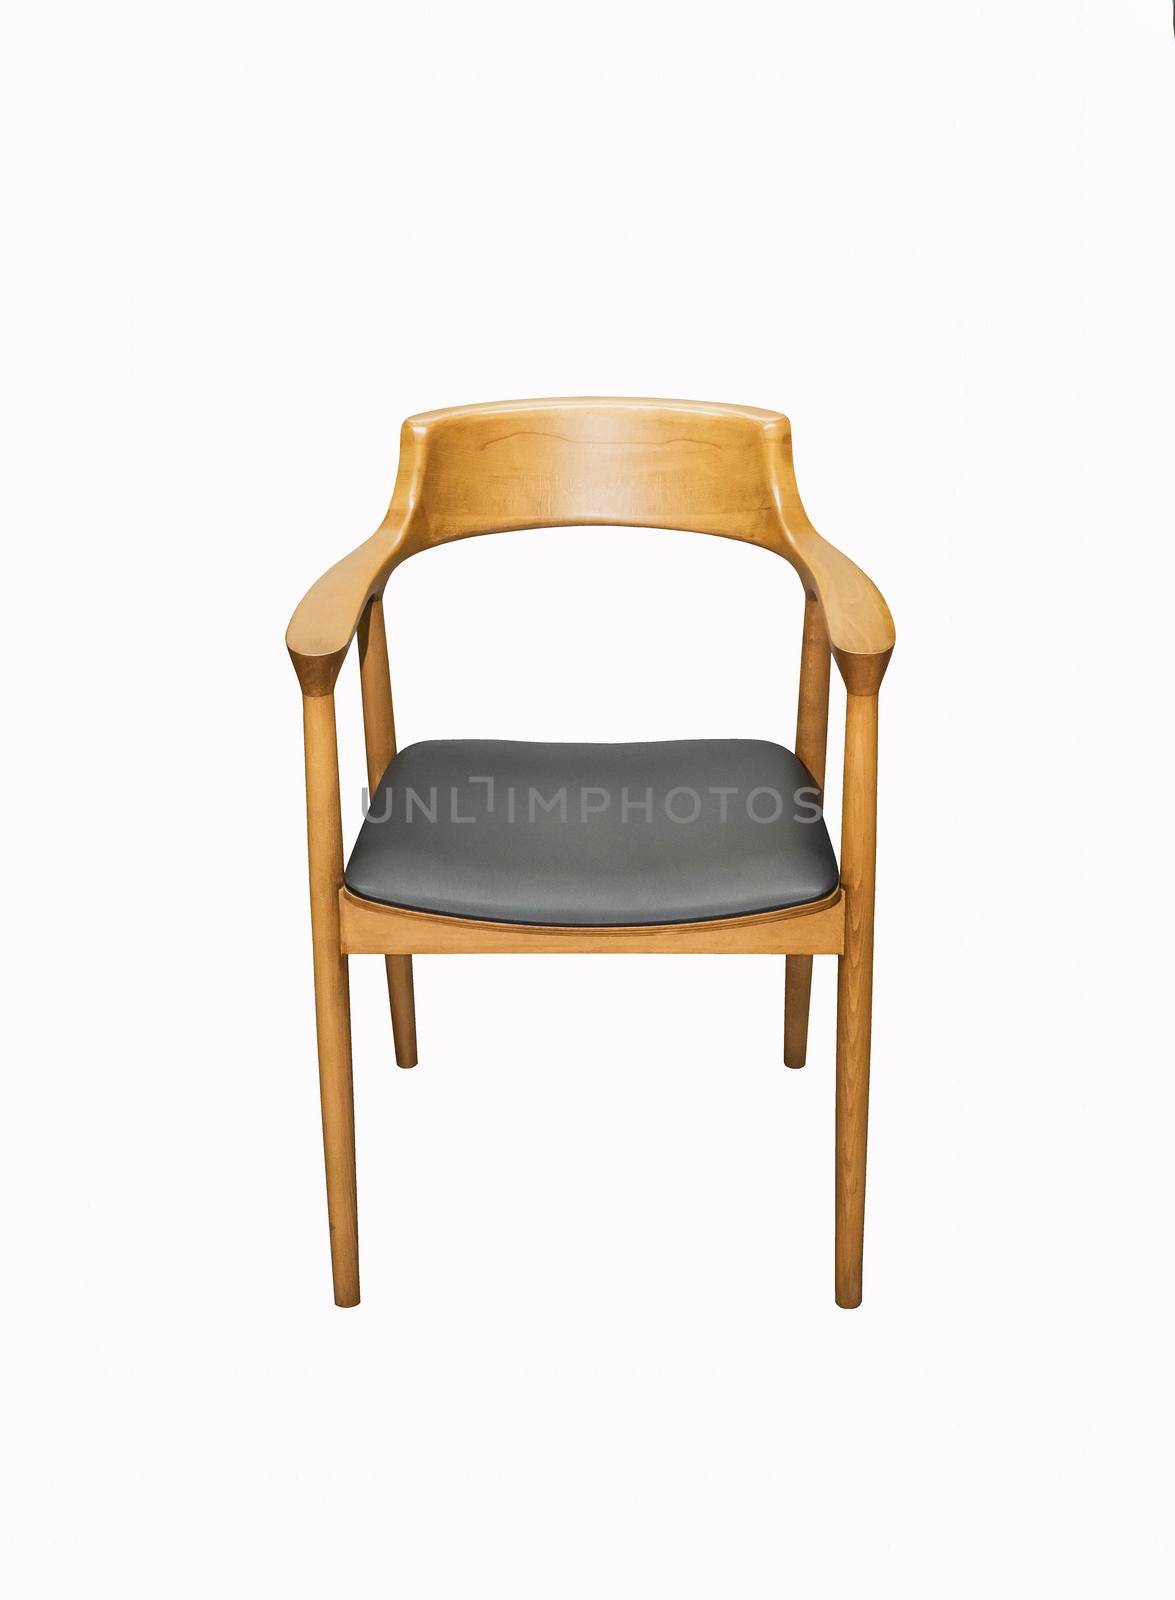 Comfortable wooden chair with armrests on white background. Interior element.